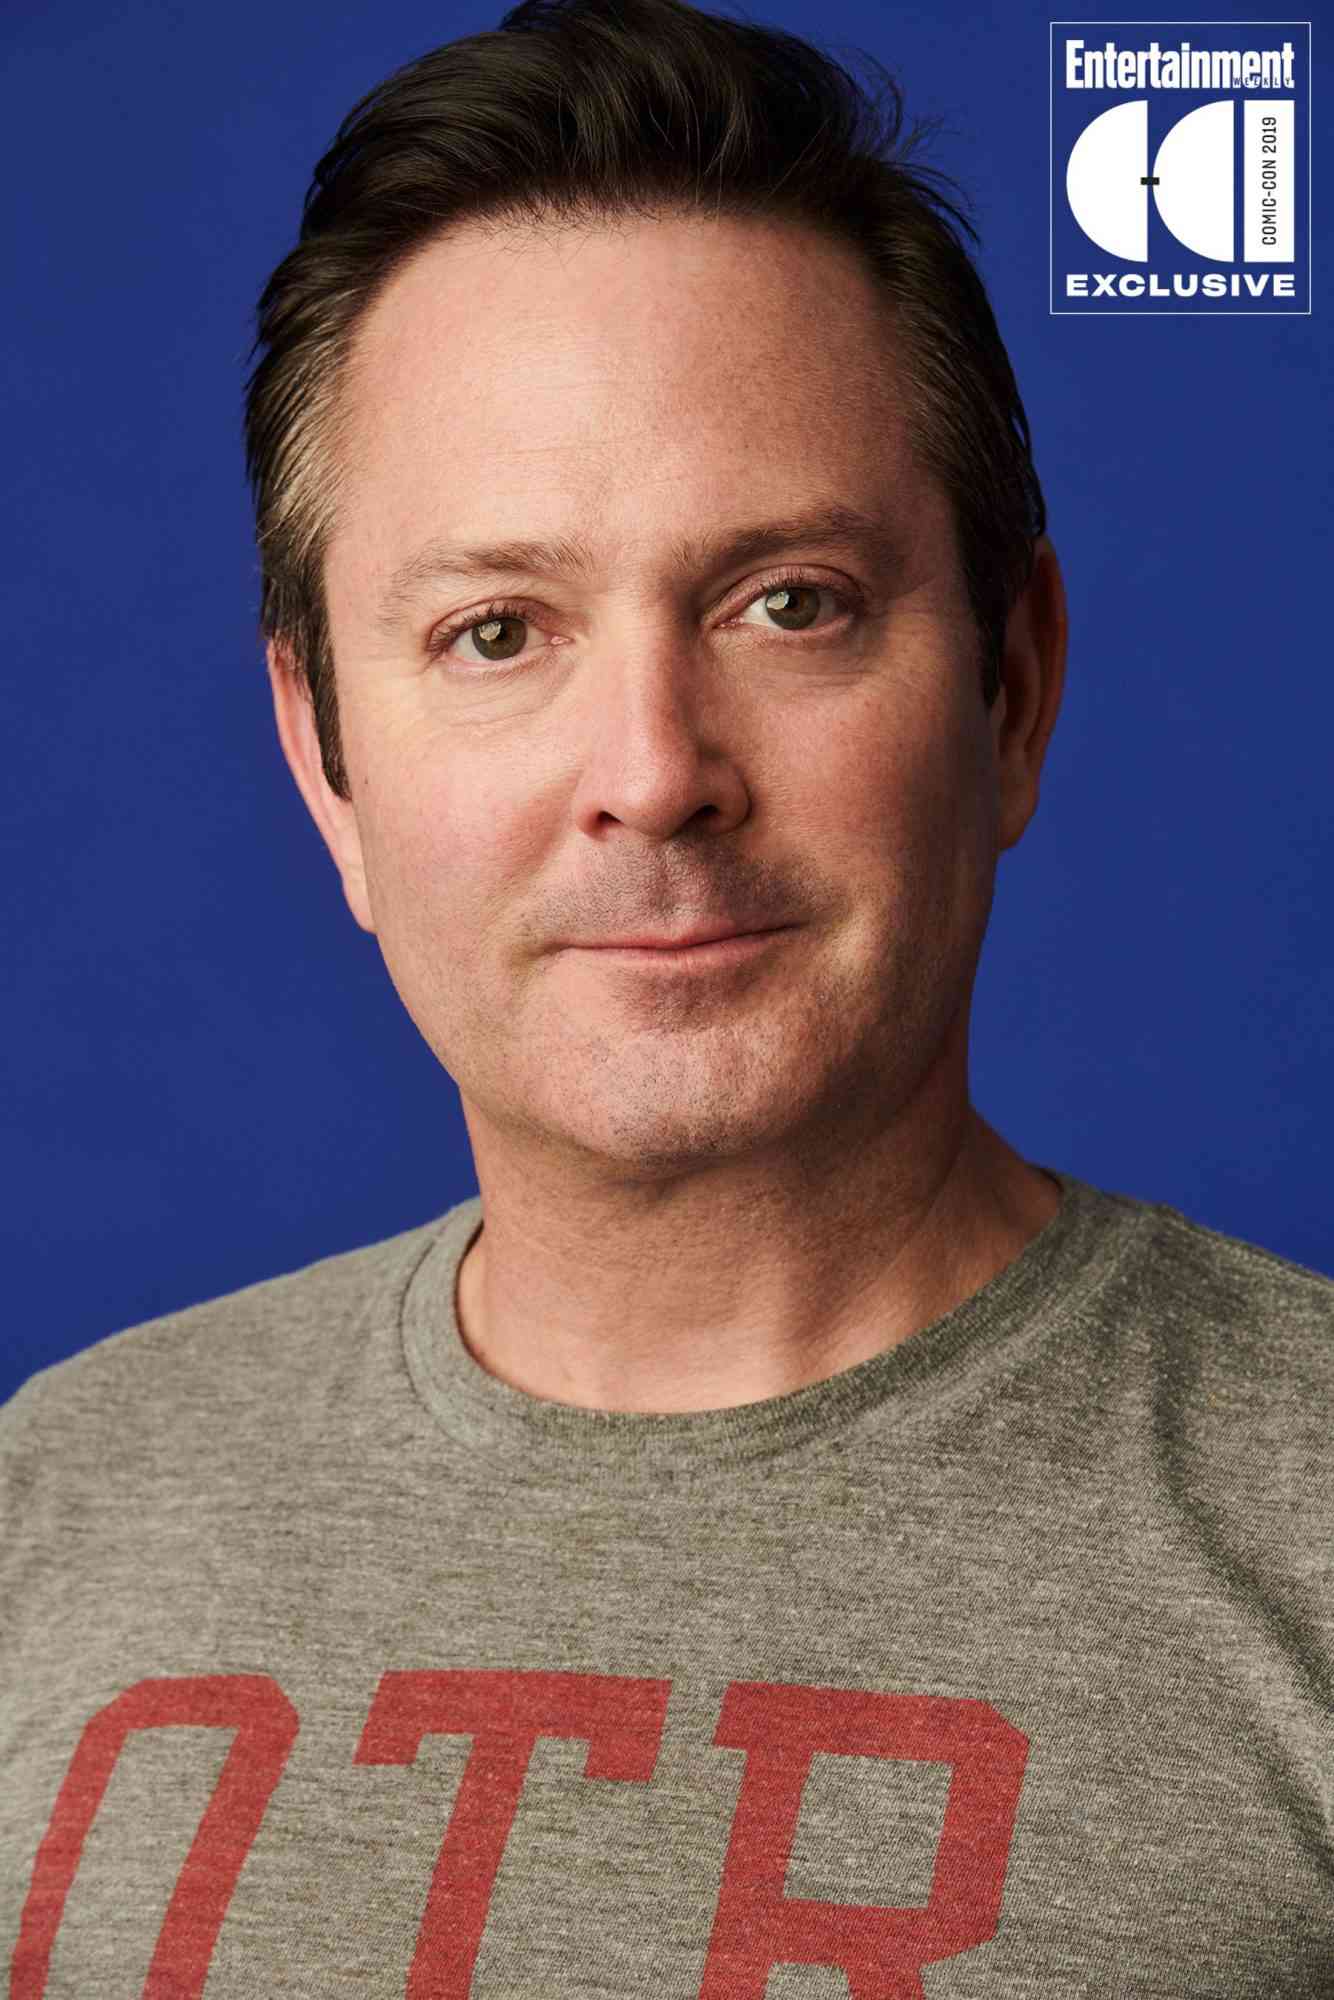 Day 2 - 2019 SDCC - San Diego Comic-Con Thomas Lennon photographed in the Entertainment Weekly portrait studio during the 2019 San Diego Comic Con on July 18th, 2019 in San Diego, California. Photographed by: Eric Ray Davidson Pictured: Thomas Lennon